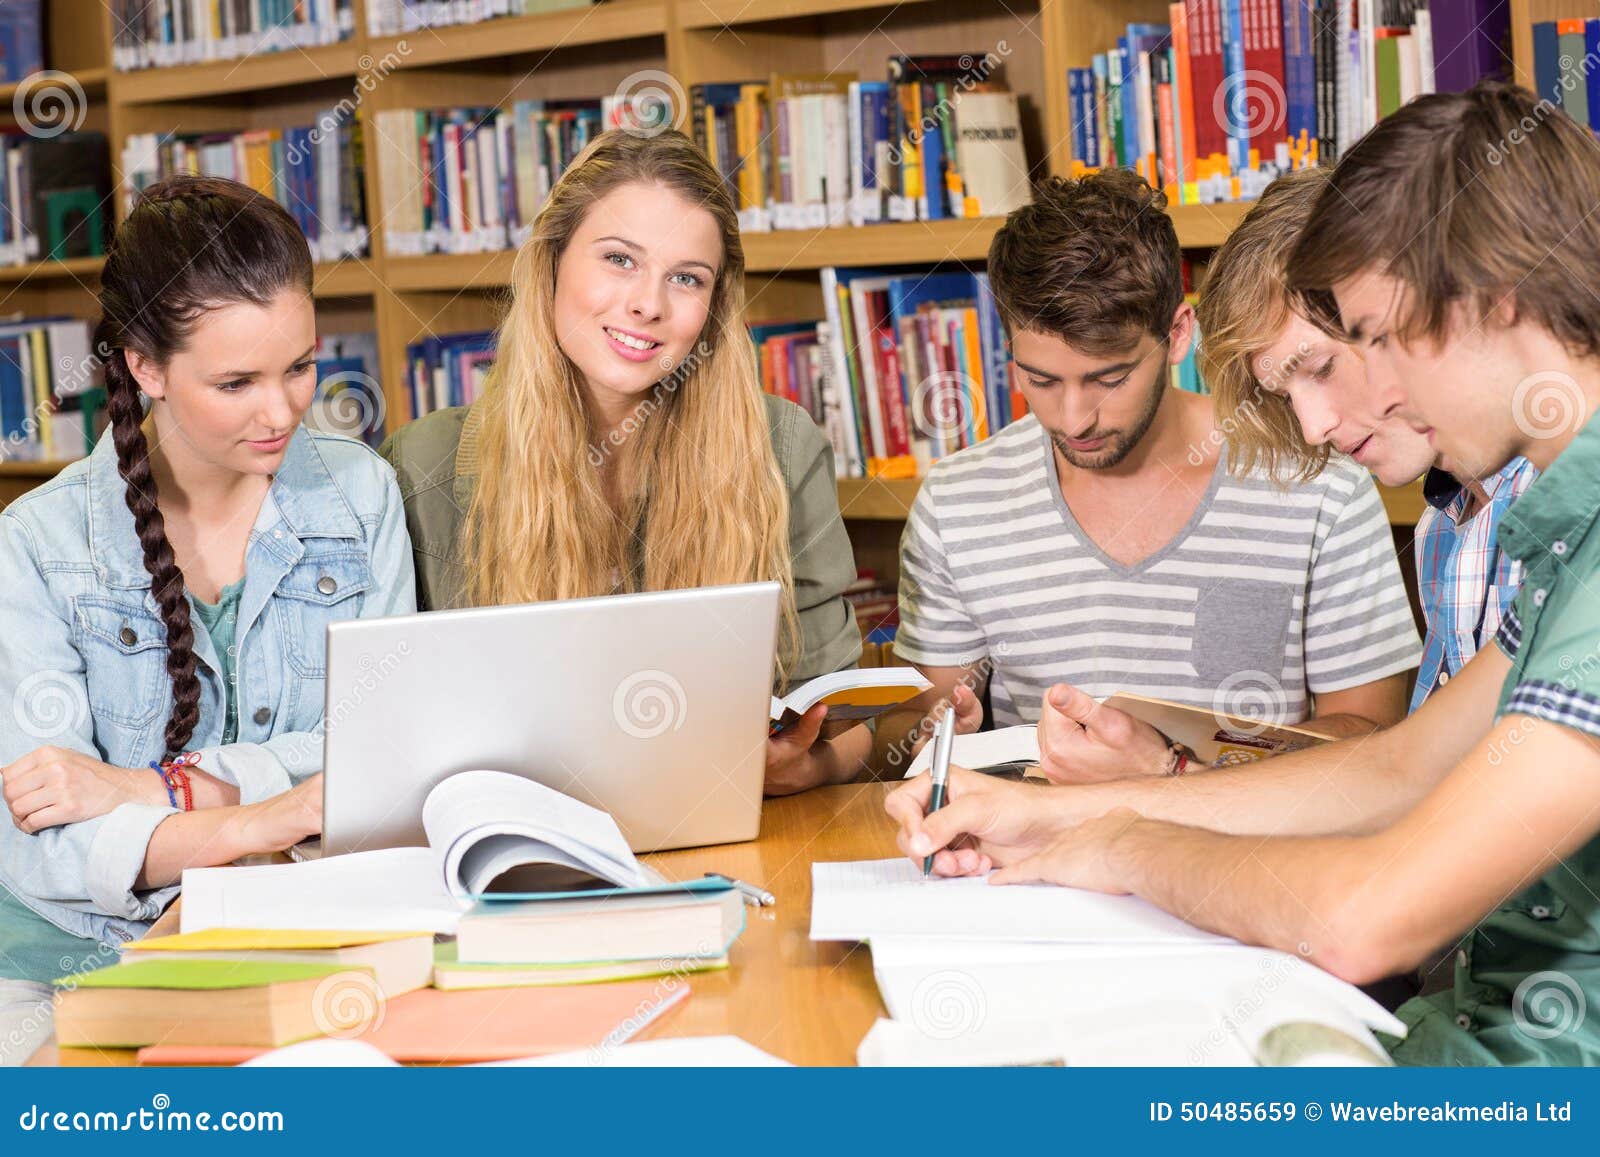 homework group picture